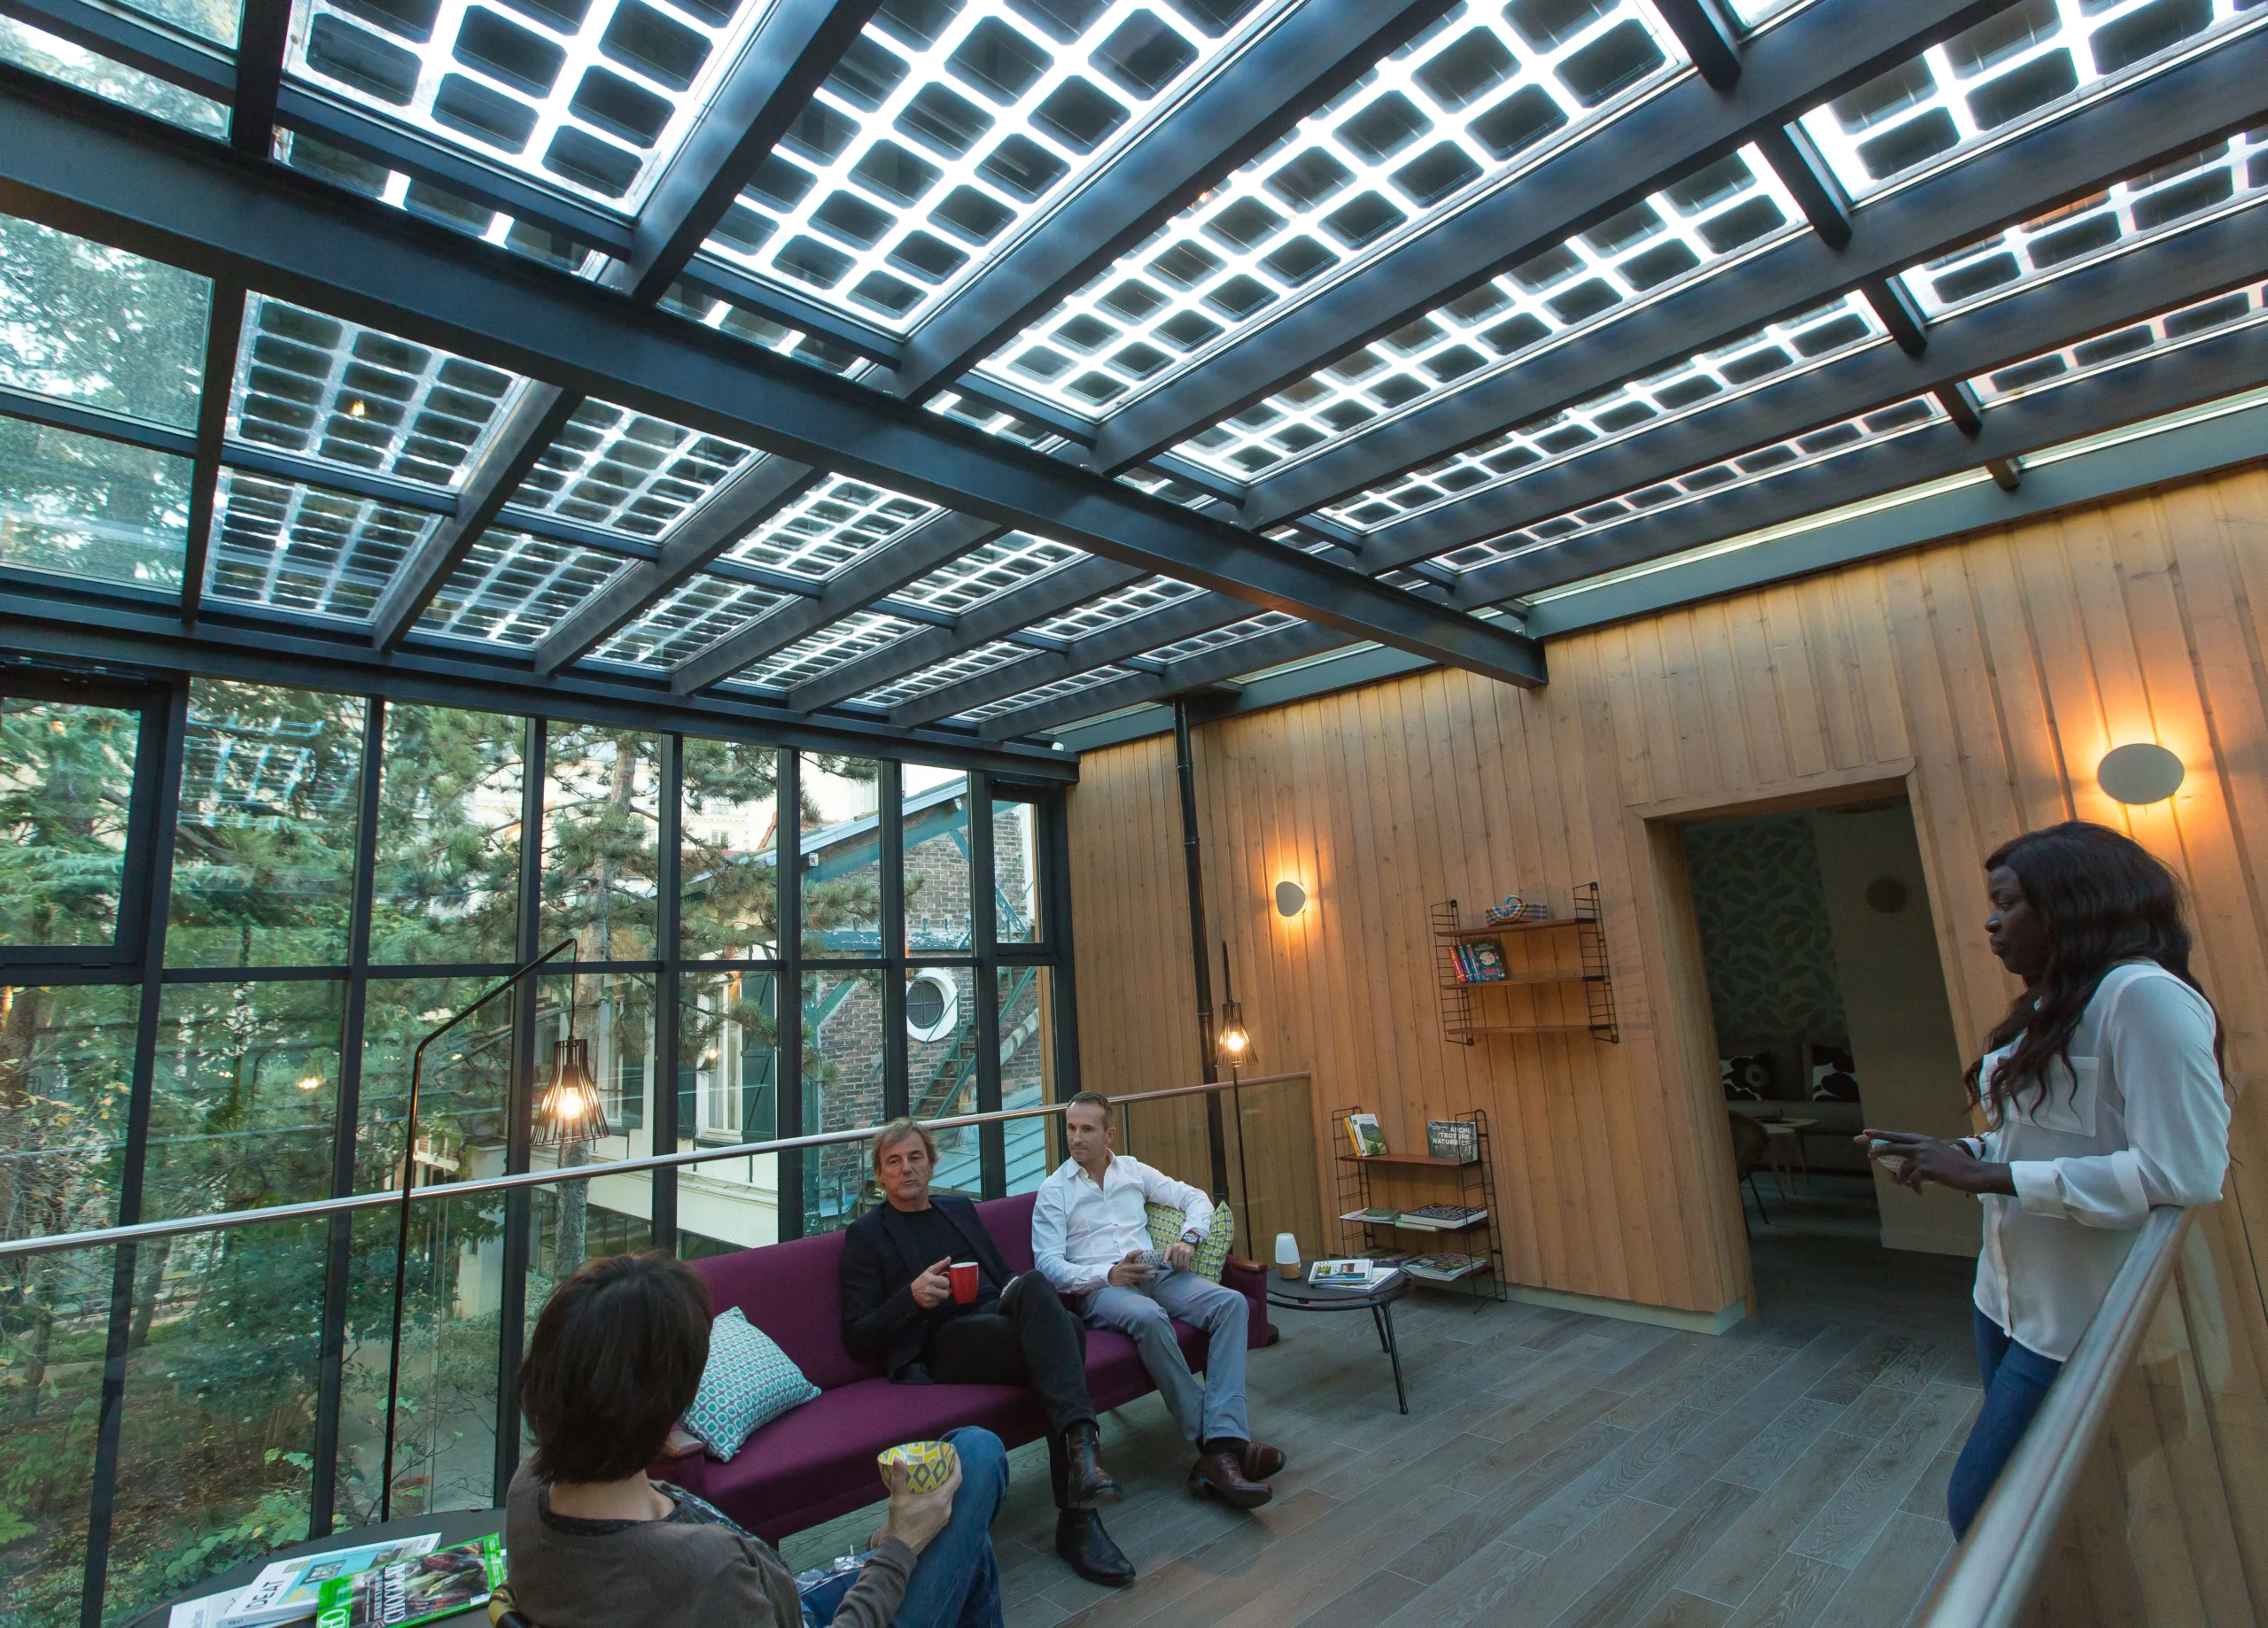 Eden Lodge Paris offers a sustainable meeting room experience under a solar panel glass ceiling, surrounded by wooden interiors and lush greenery, emphasizing eco-friendly business travel.